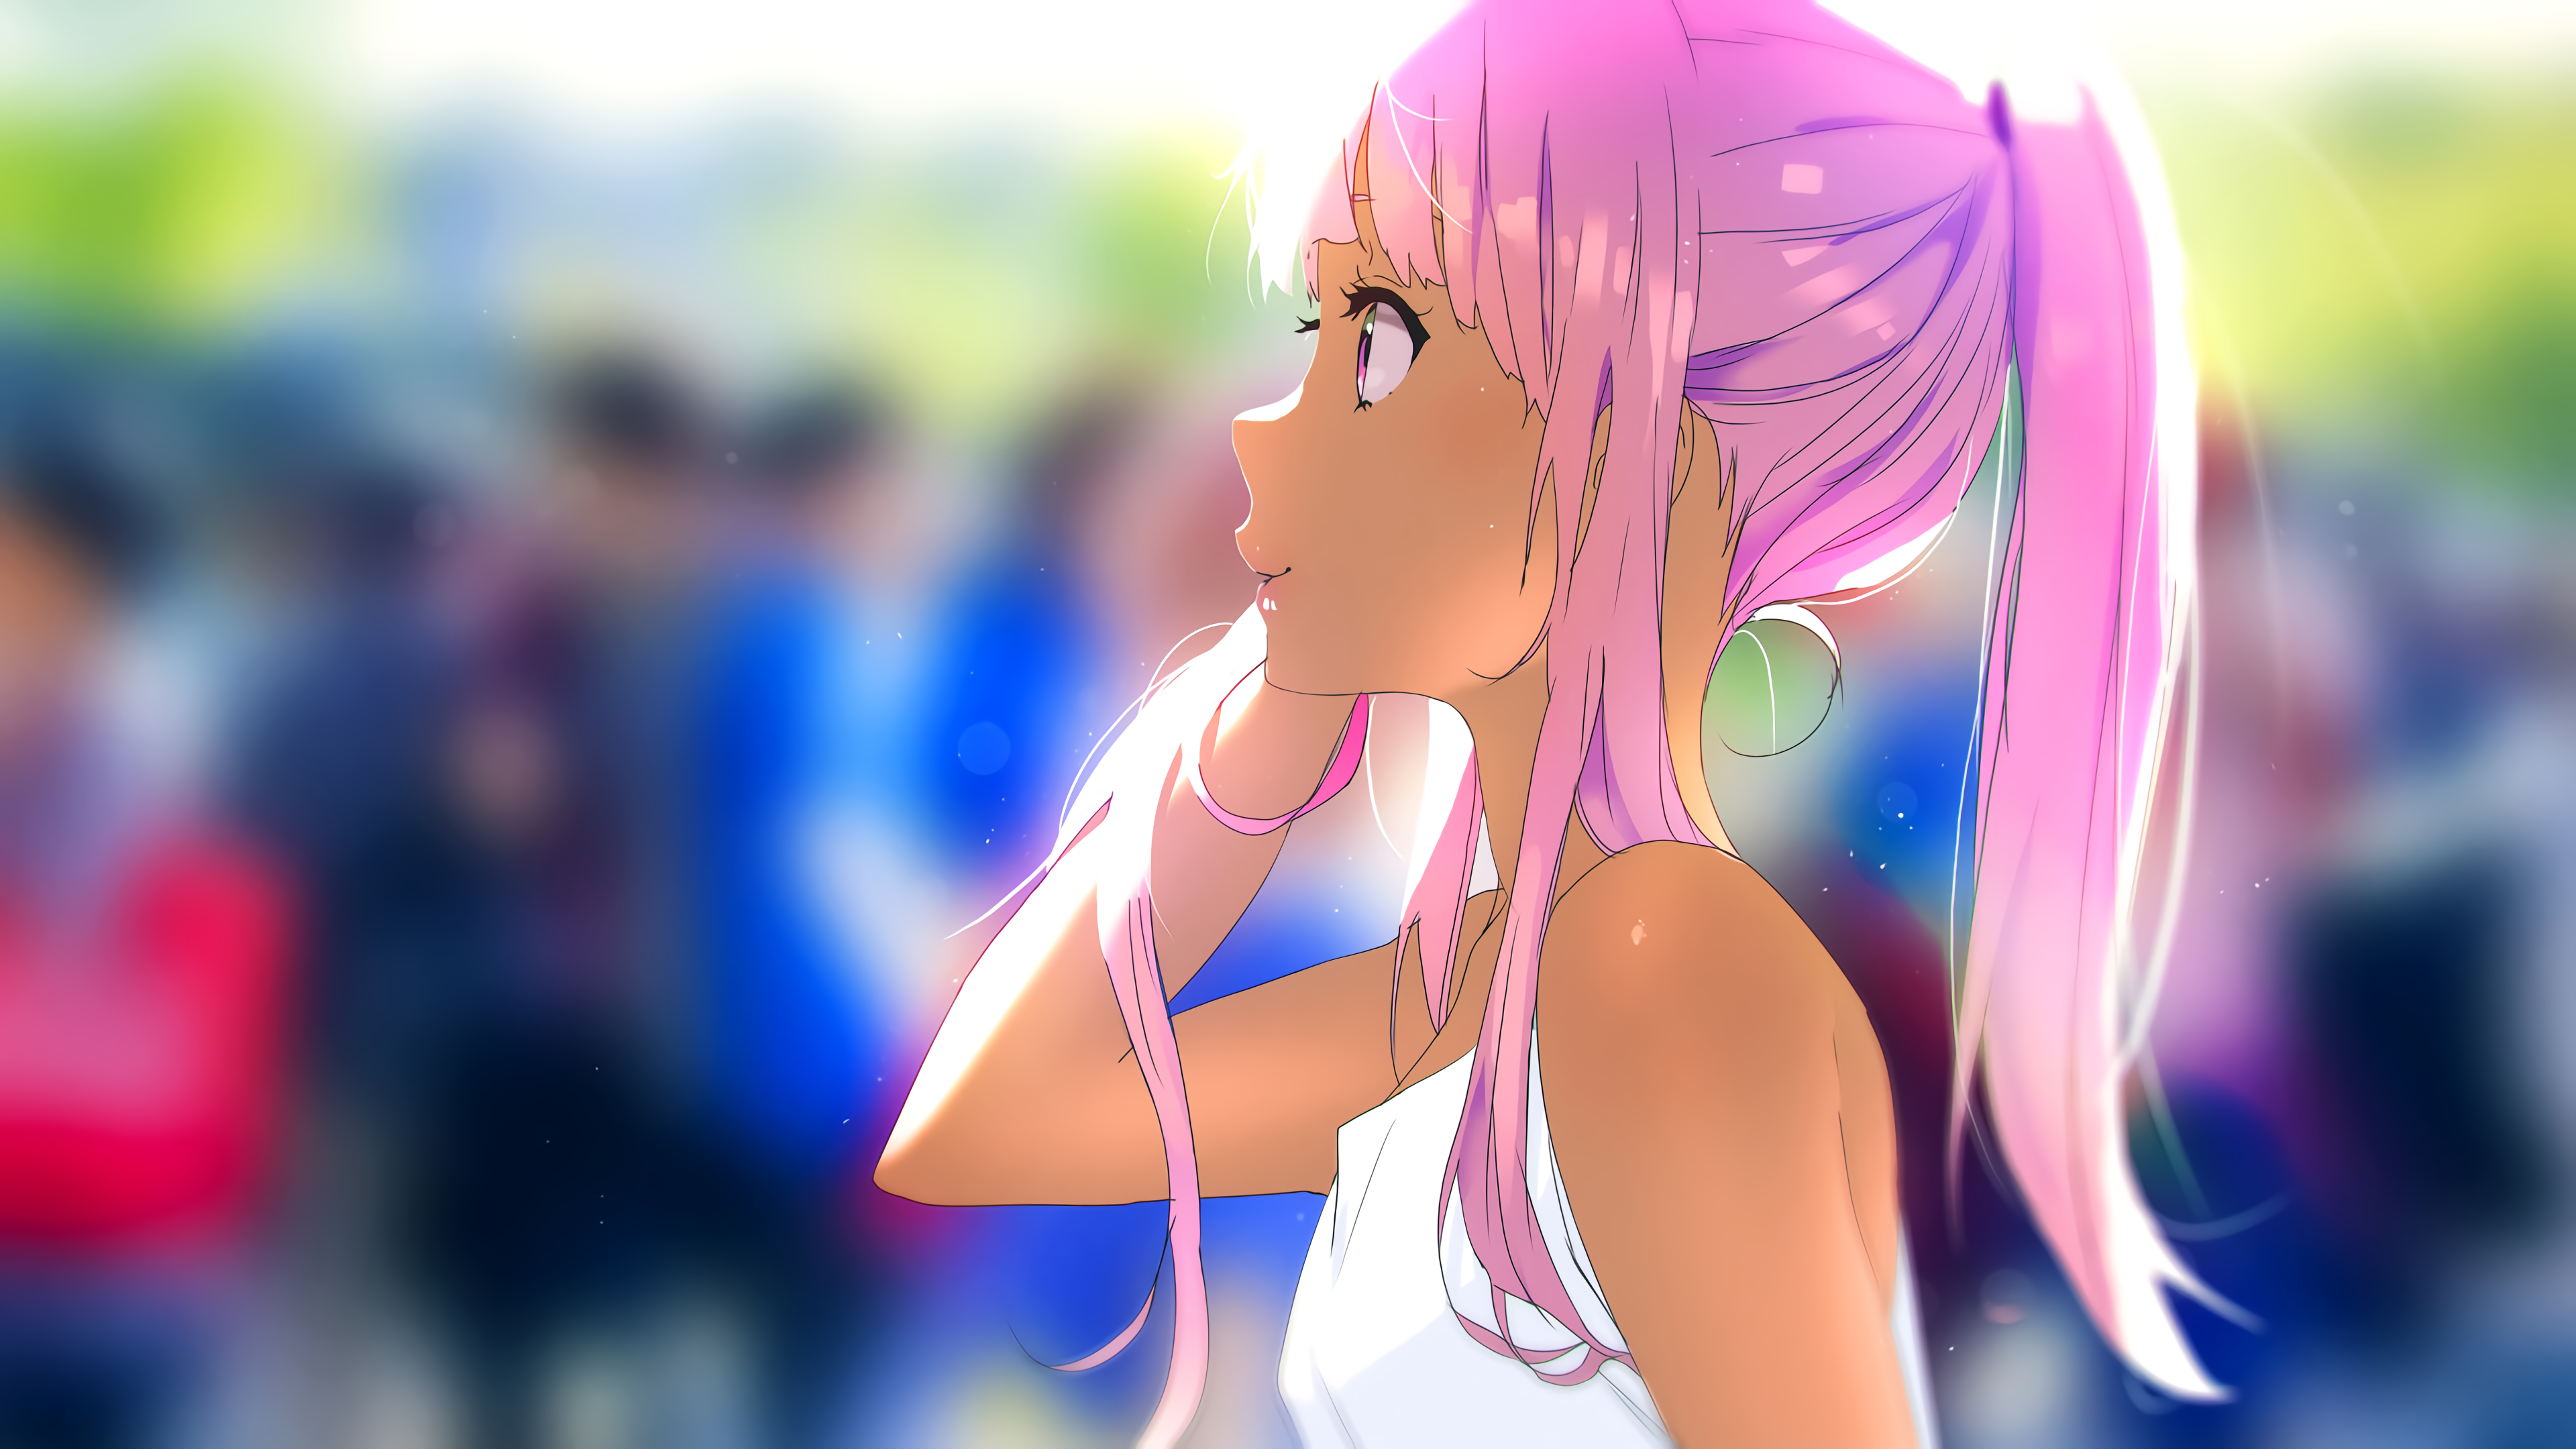 Tom Skender Anime Girls Anime DeviantArt Looking Away Ponytail Blurred Blurry Background Face Parted 3840x2160